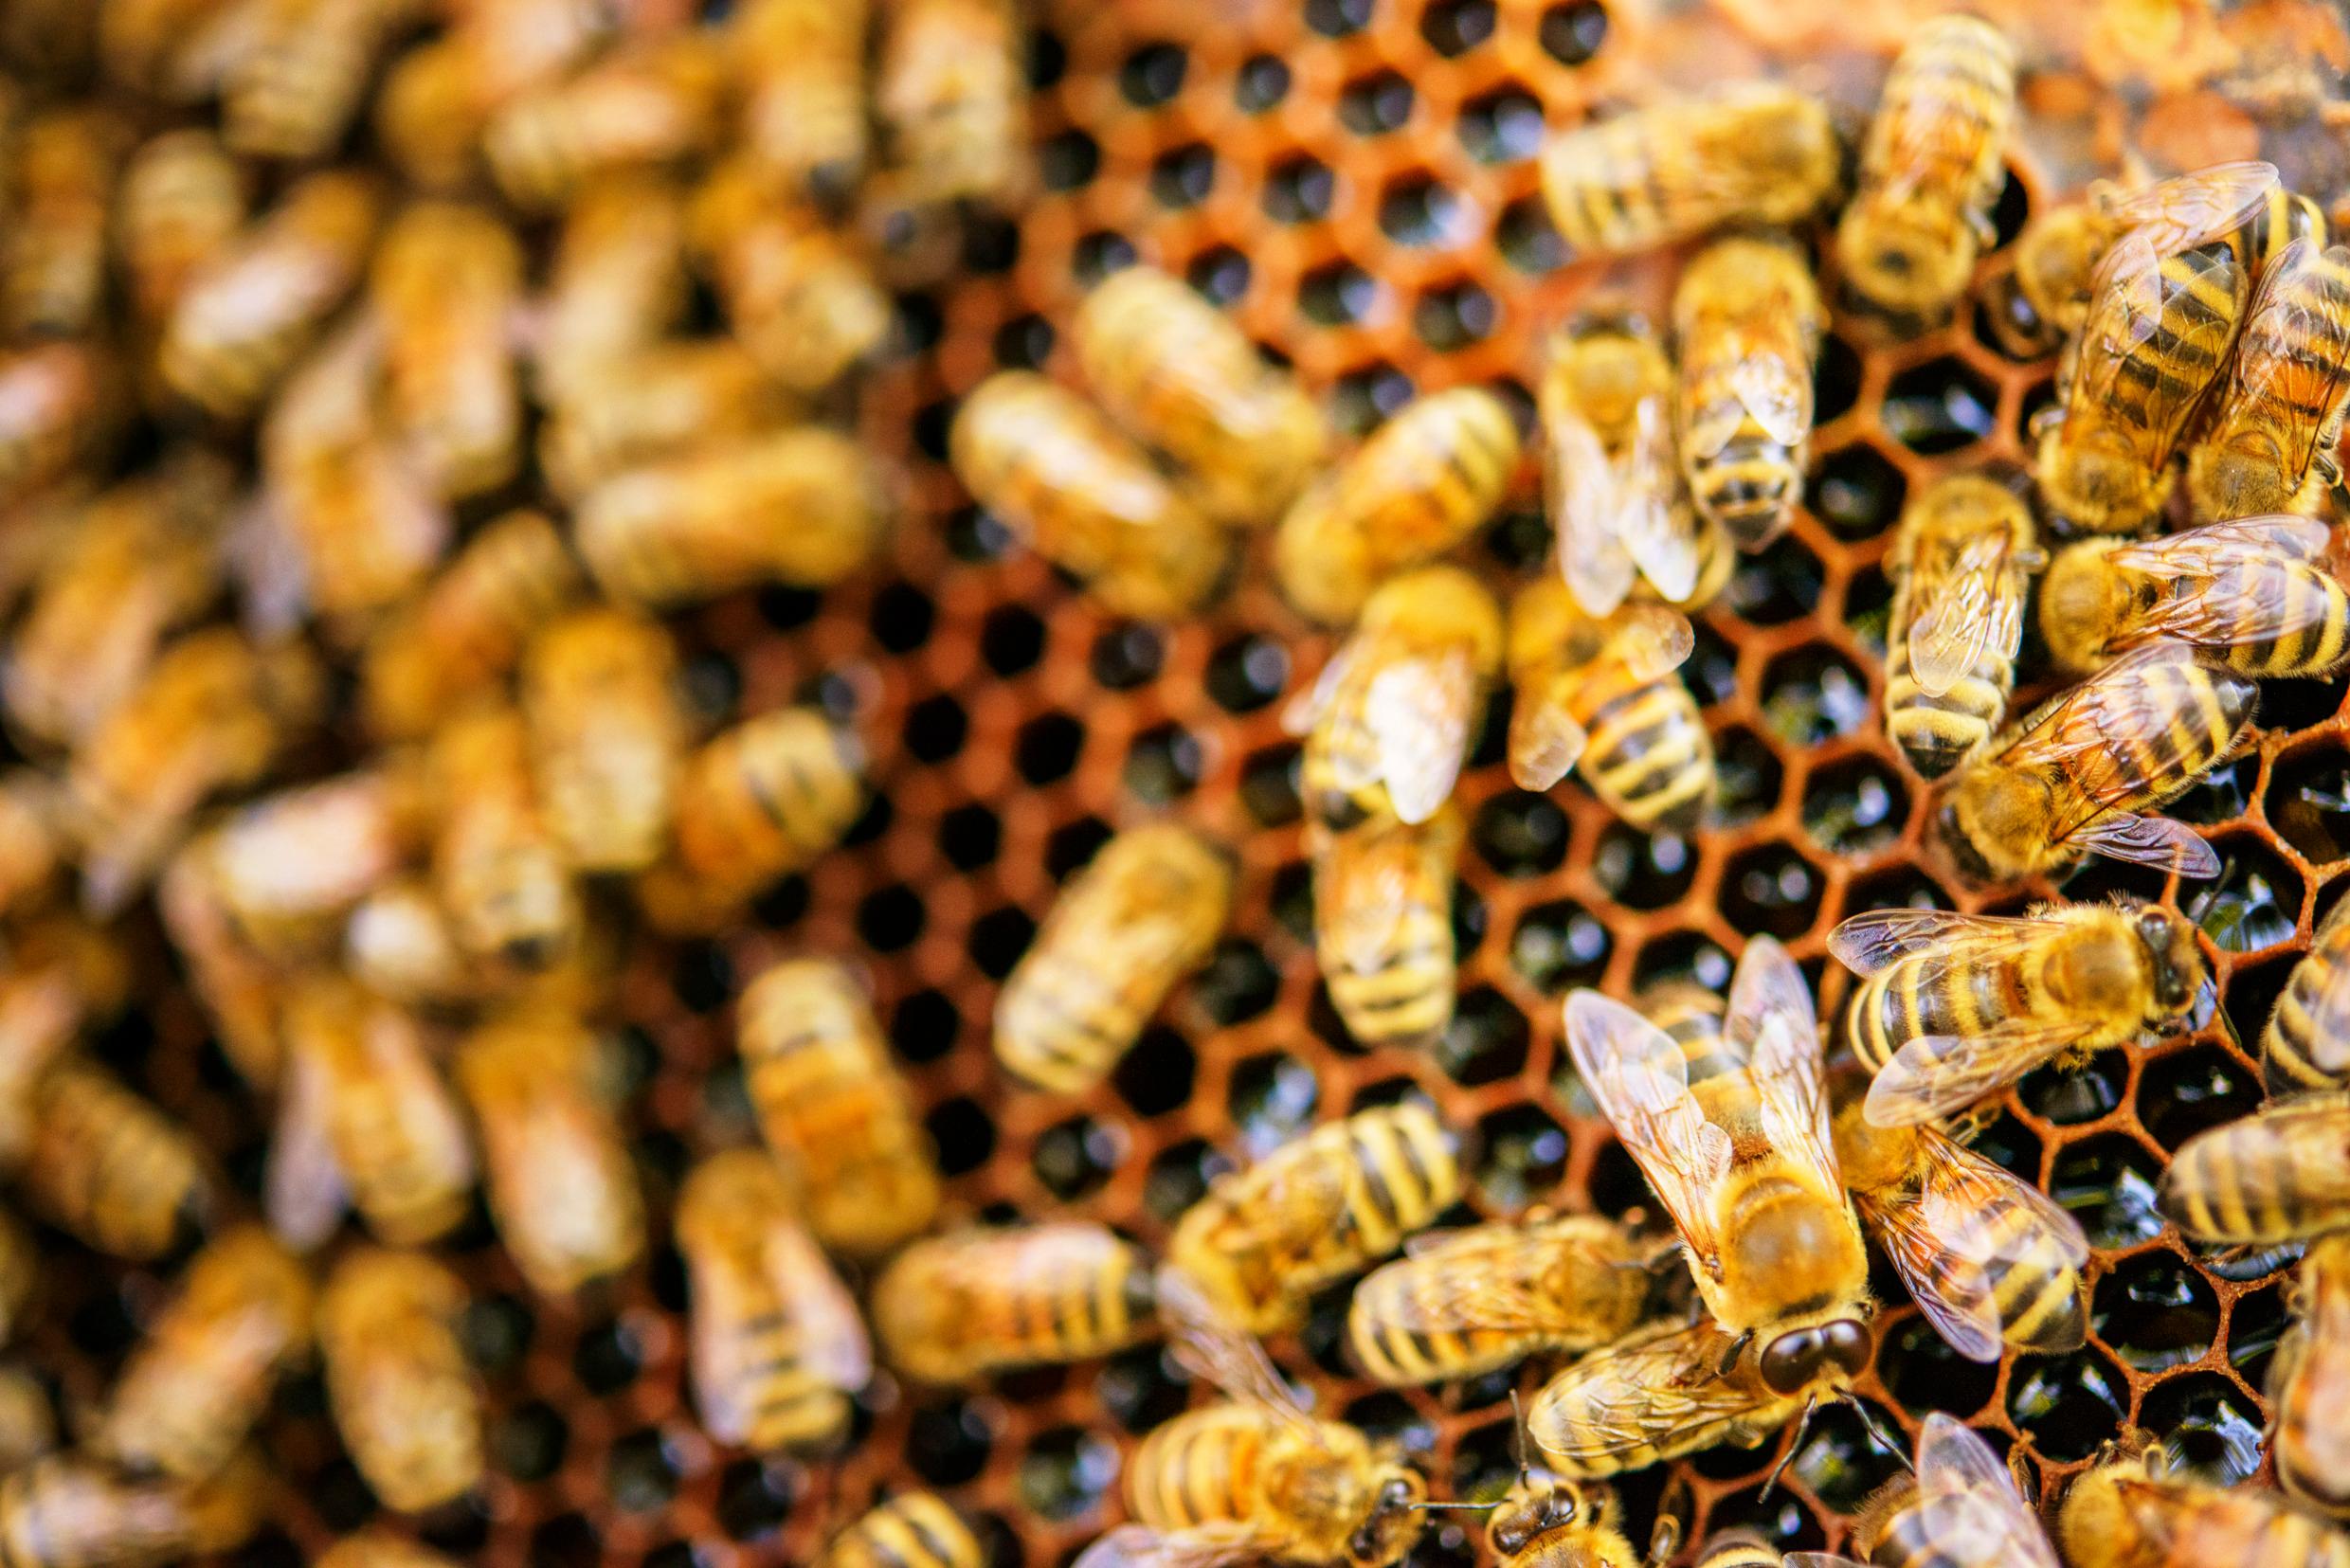 Bees in a beehive – a bug for a greener future.